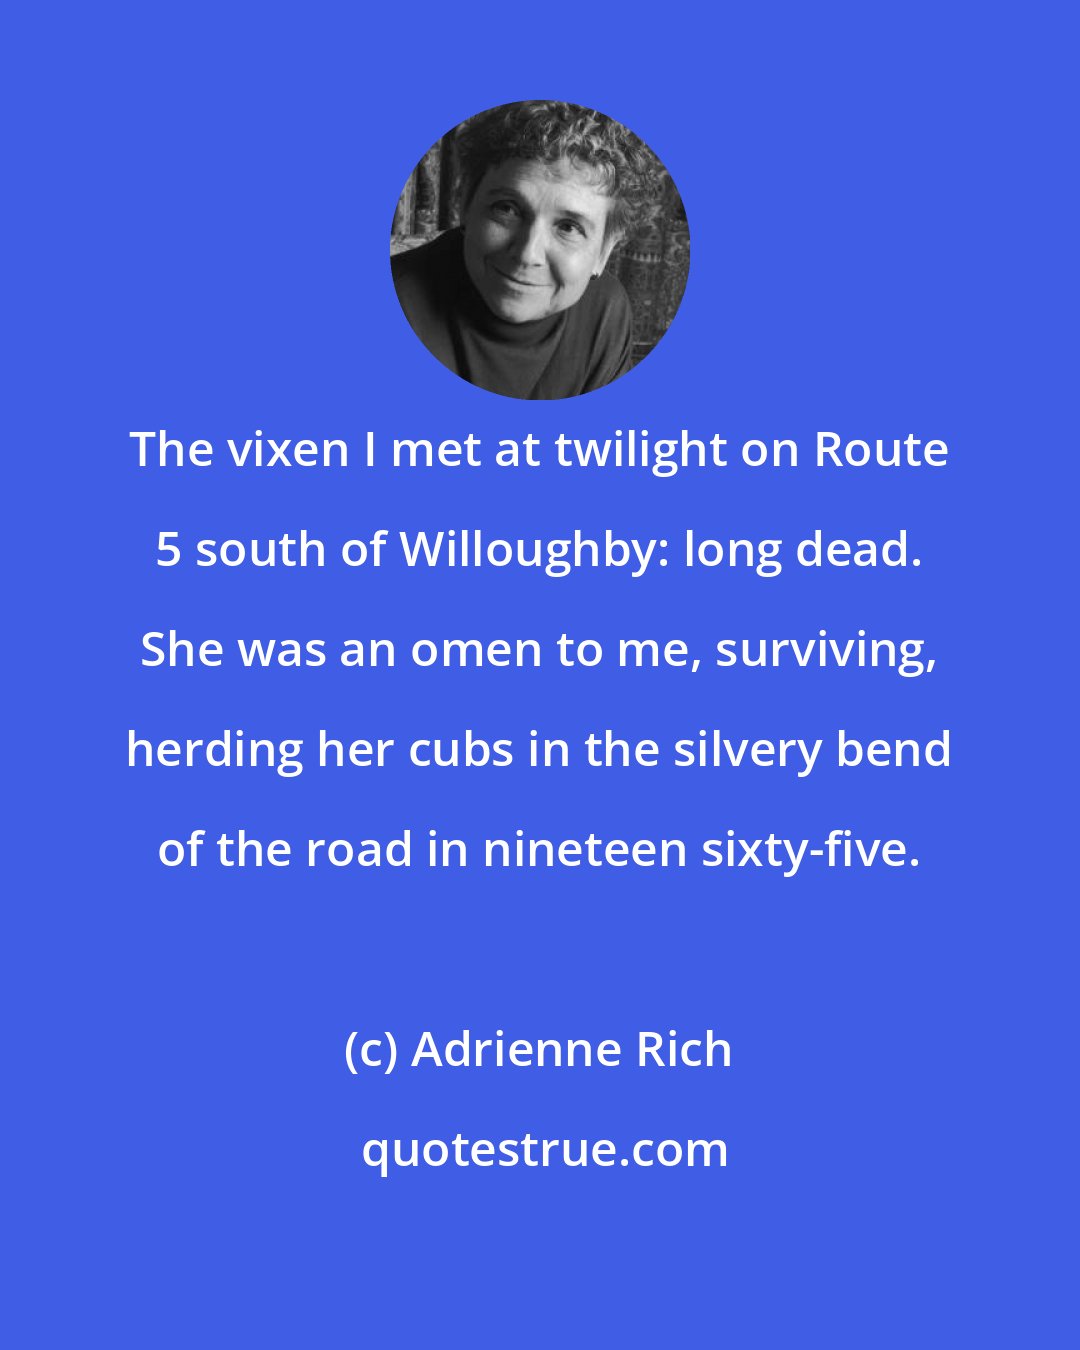 Adrienne Rich: The vixen I met at twilight on Route 5 south of Willoughby: long dead. She was an omen to me, surviving, herding her cubs in the silvery bend of the road in nineteen sixty-five.